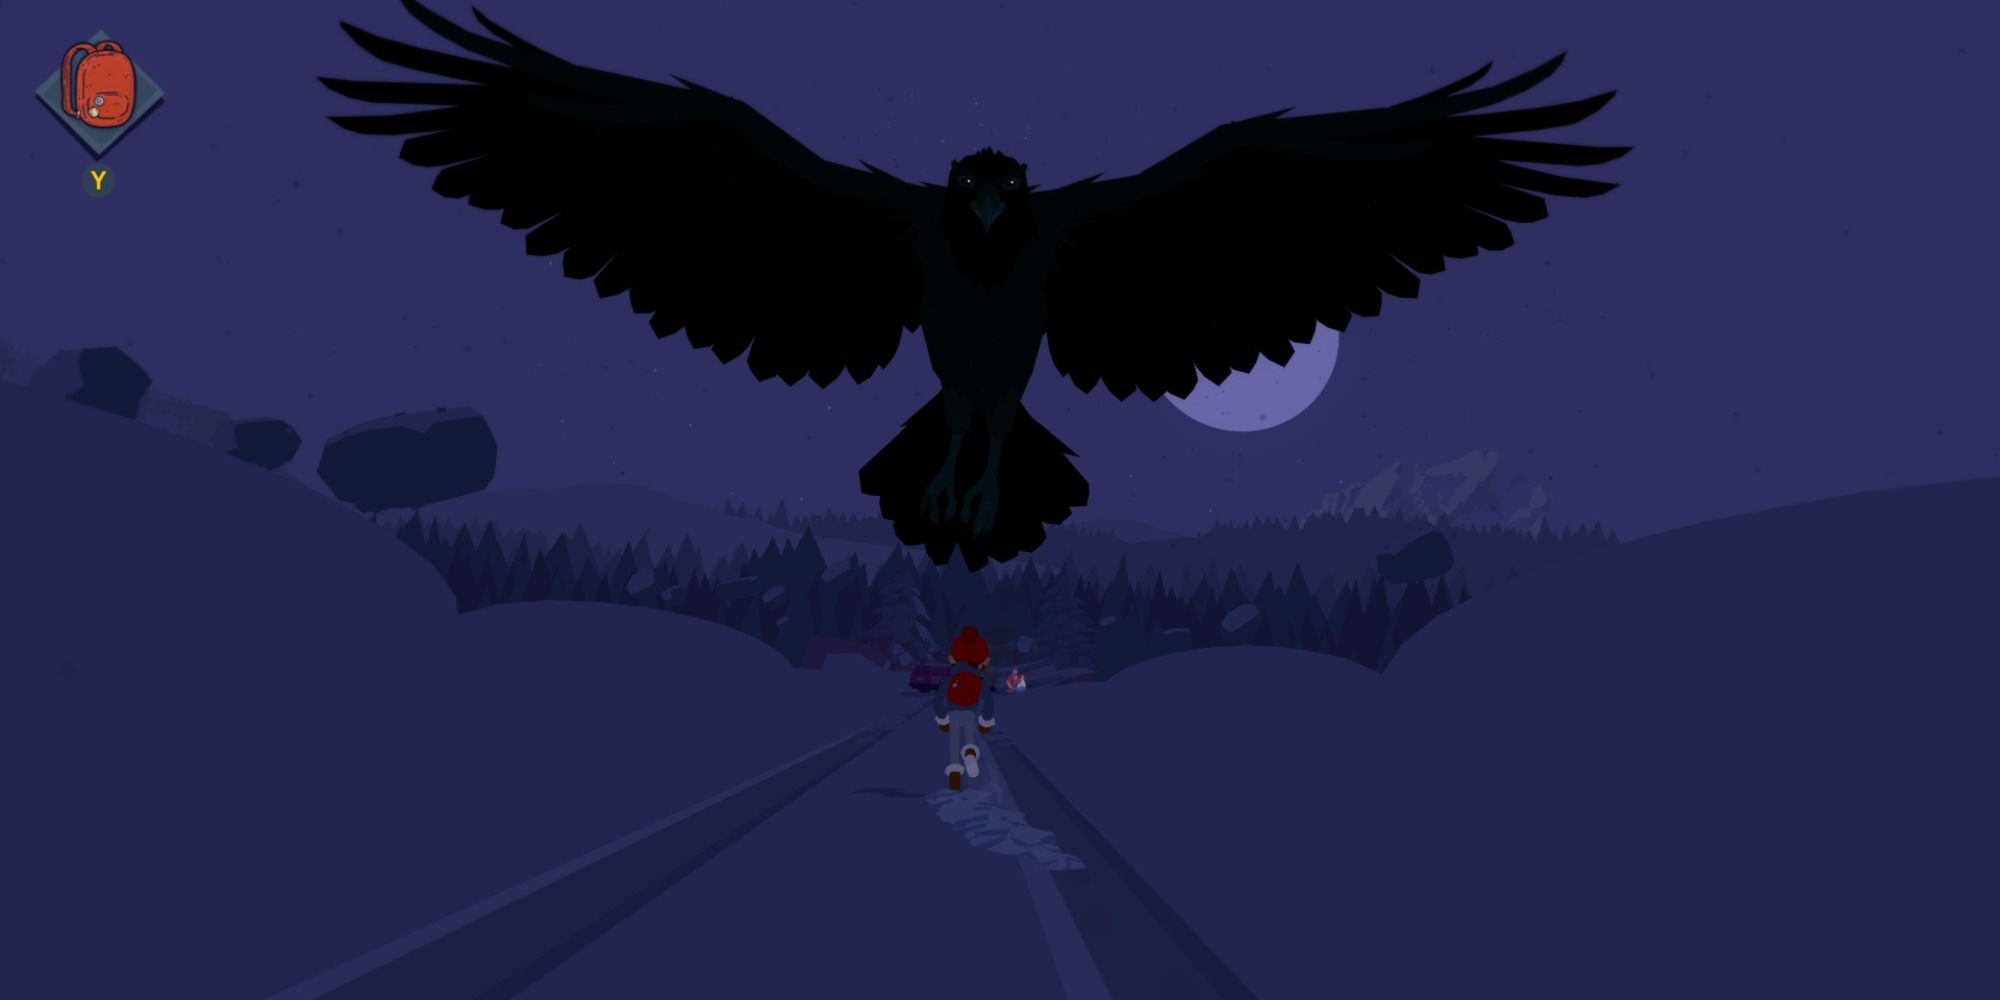 Tove chasing after the car with a large raven above it in Roki